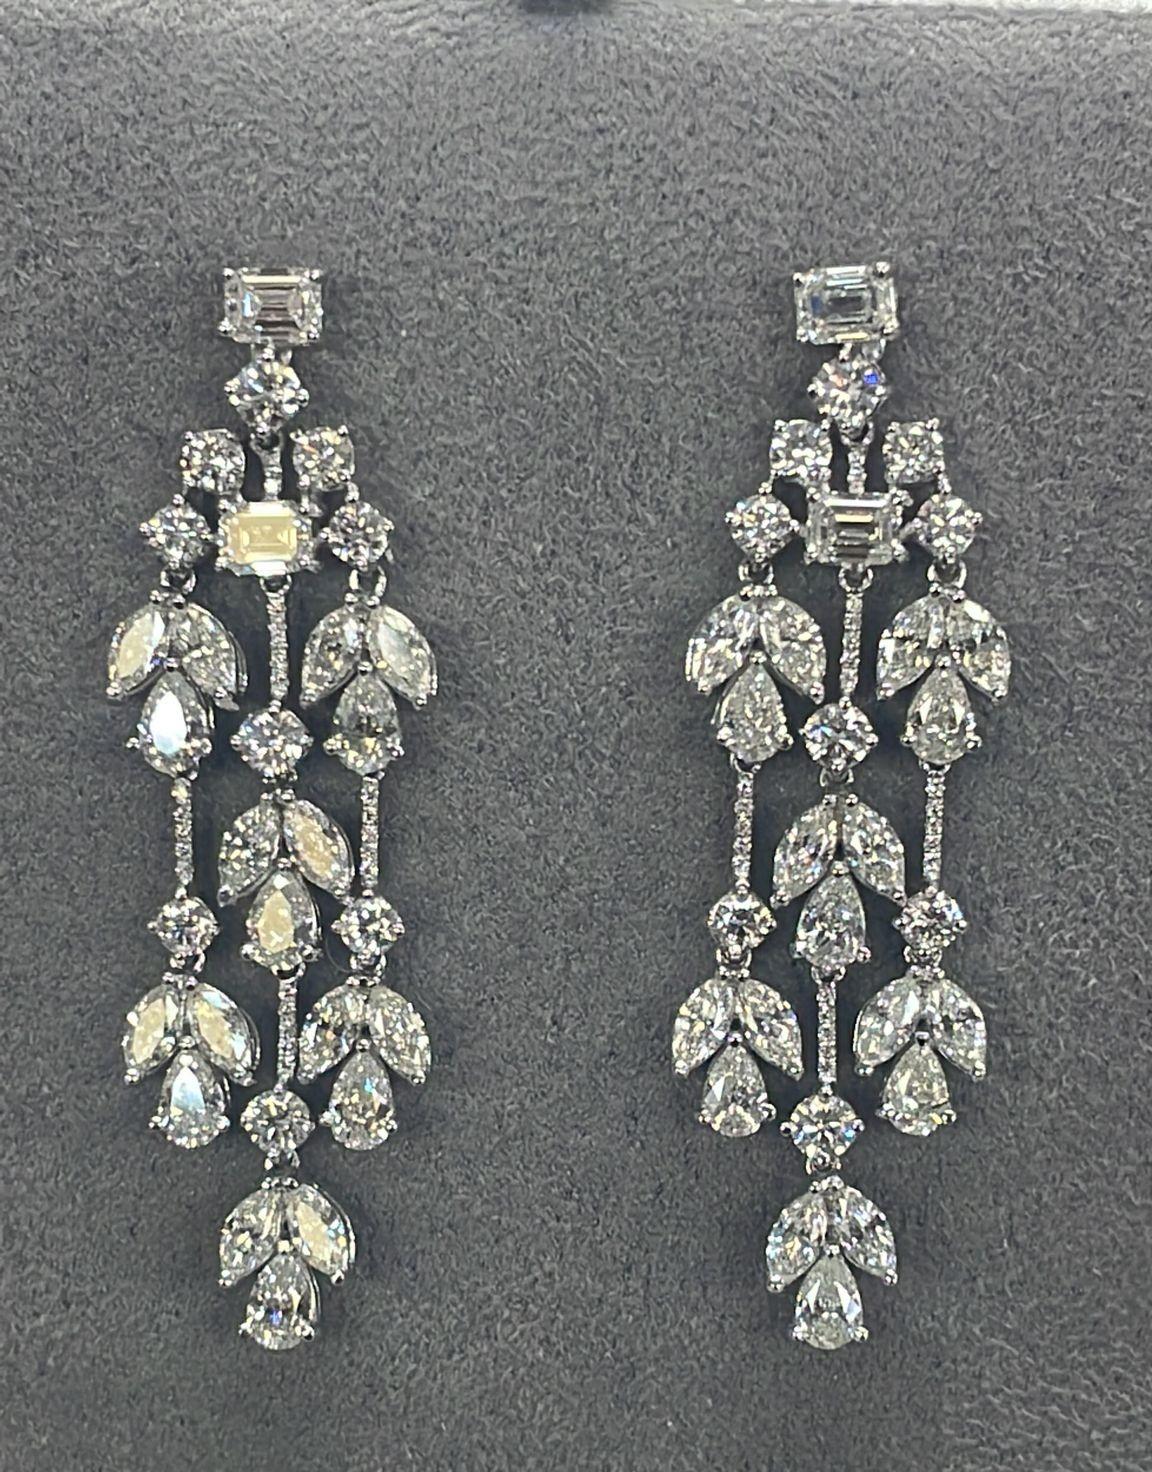 
The Following Items we are offering is a Rare Important Radiant 18KT Gold Glamorous and Elaborate Rare Magnificent Glittering White Diamond Chandelier Earrings. Earrings feature Rare Sparkling White Diamonds set in 18KT Gold!! T.C.W. Approx